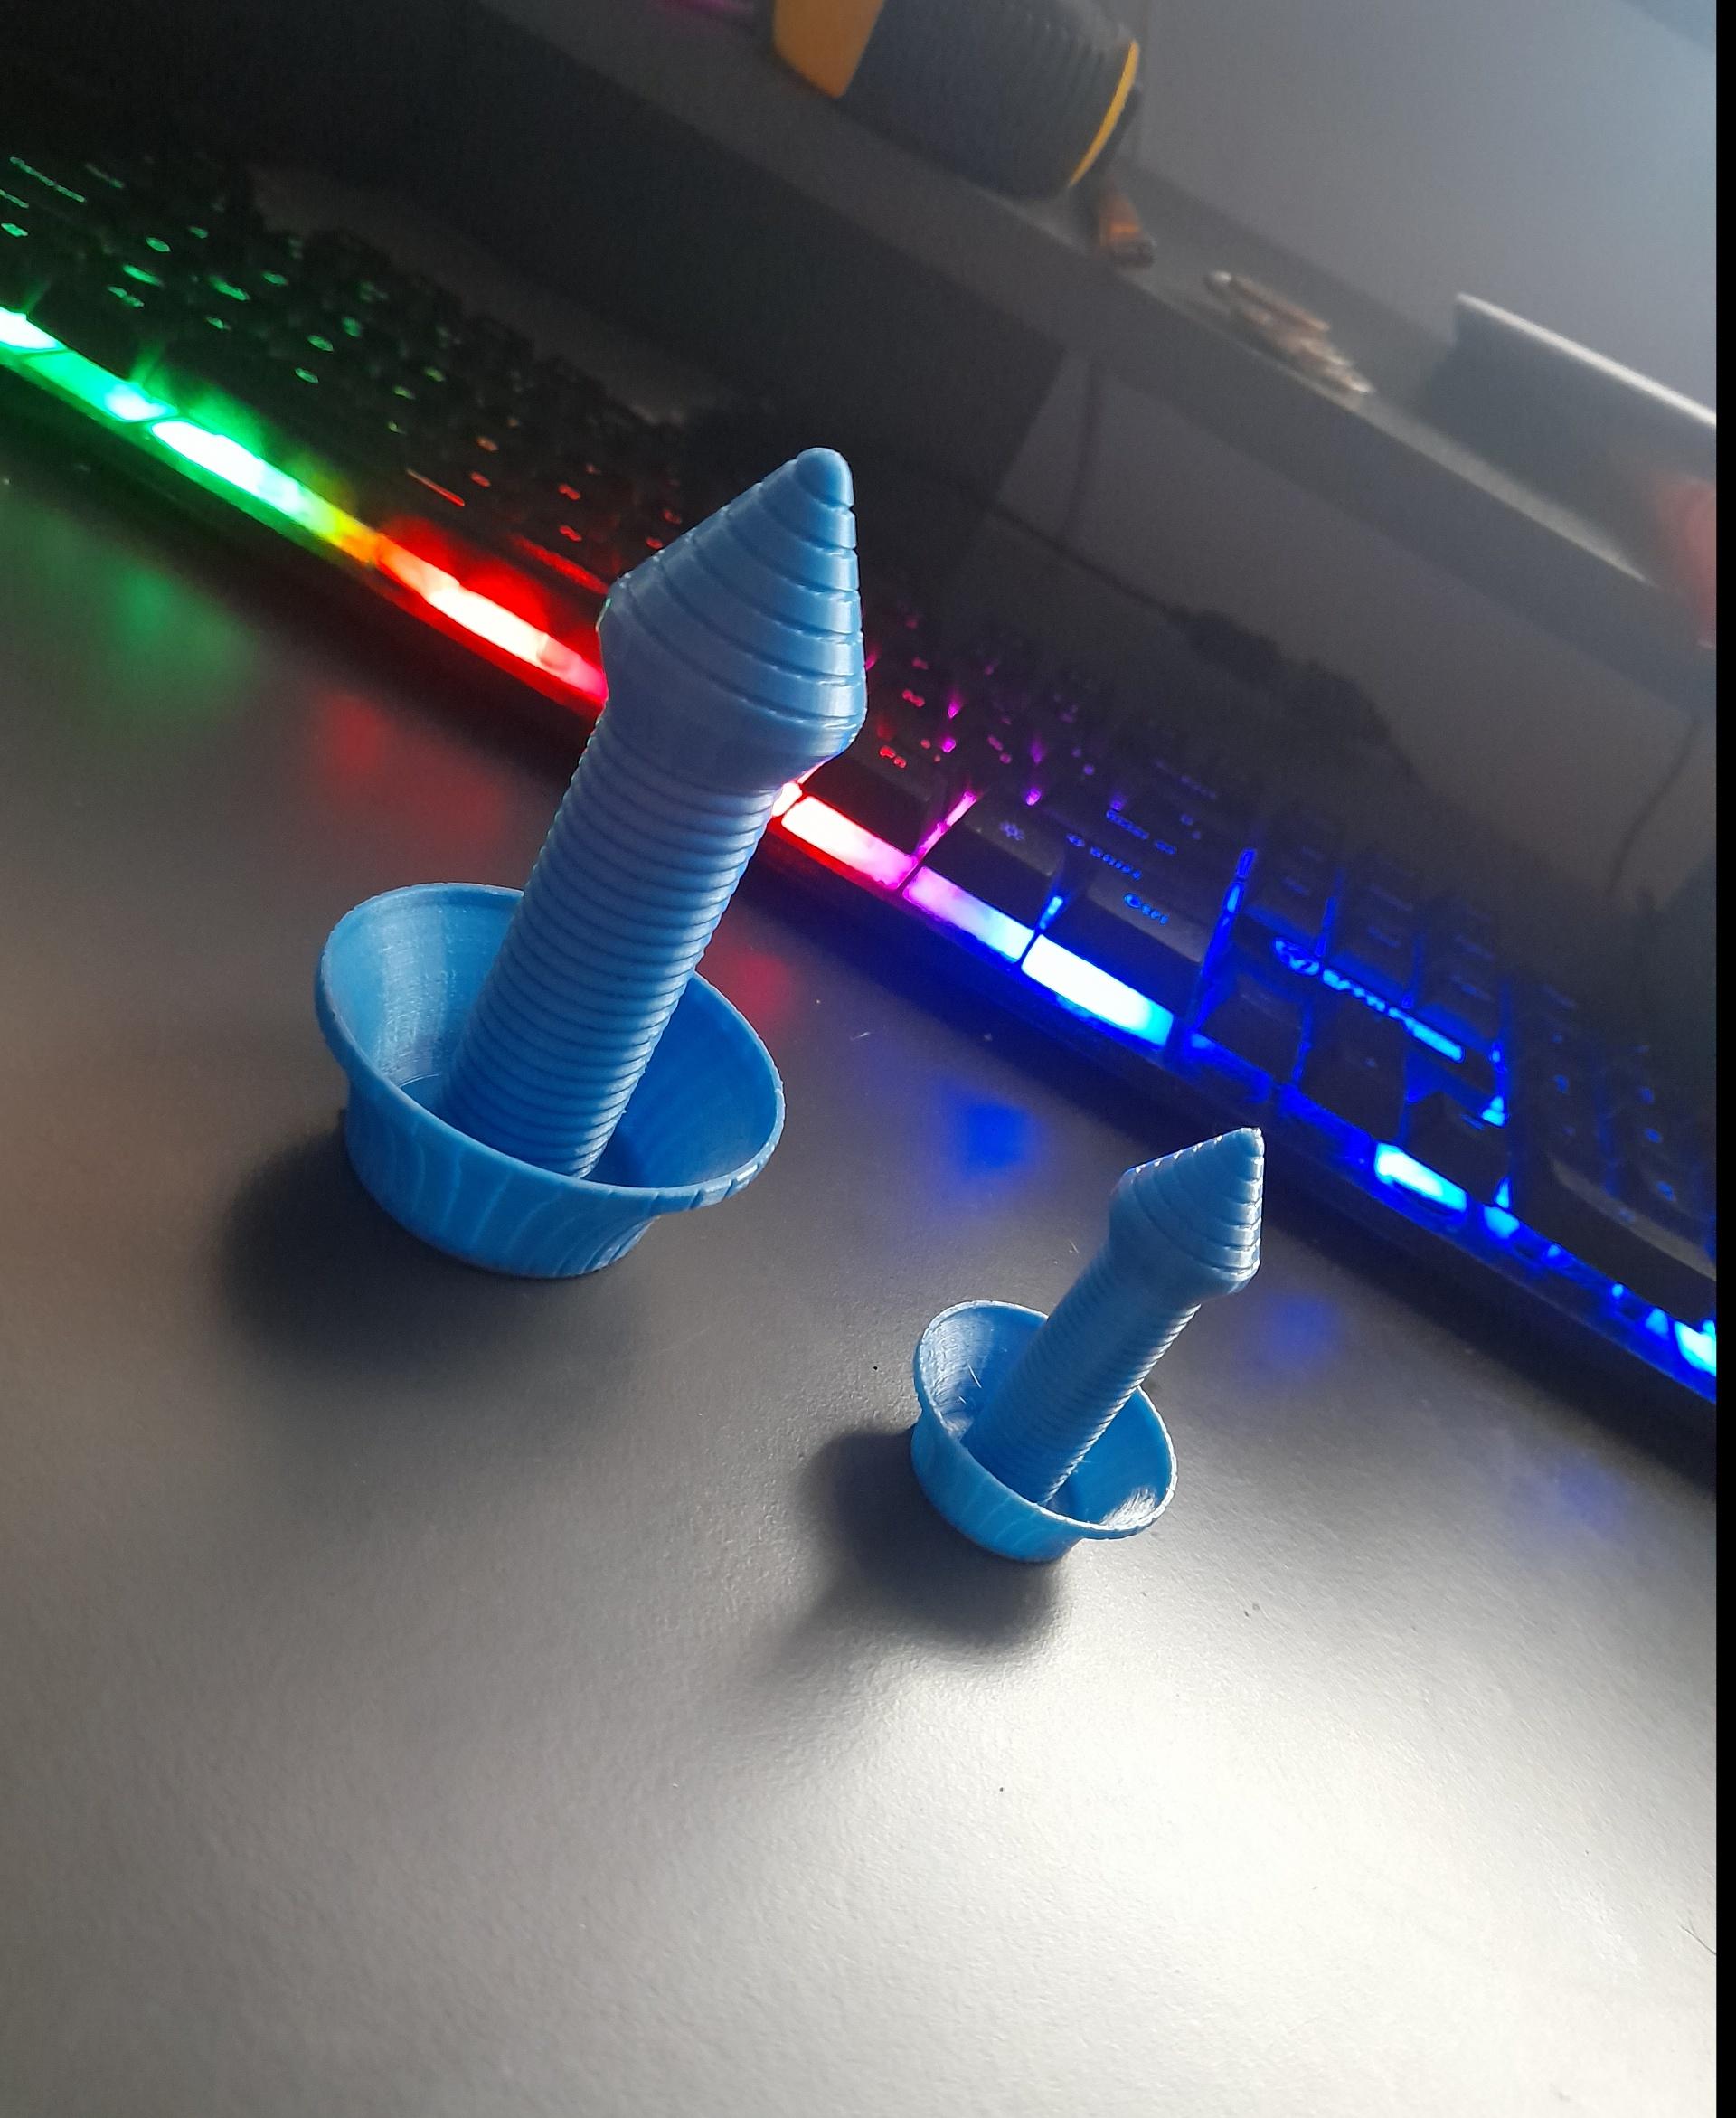 Collapsing Drill Sword Print-in-Place - hey love it butt got a little problem these are test prints the large one is 50% the small one is 30%
everything is good butt the small one got no inside and the big one melted to gether bed is on 50 heat nozzle 200 any tips ? - 3d model